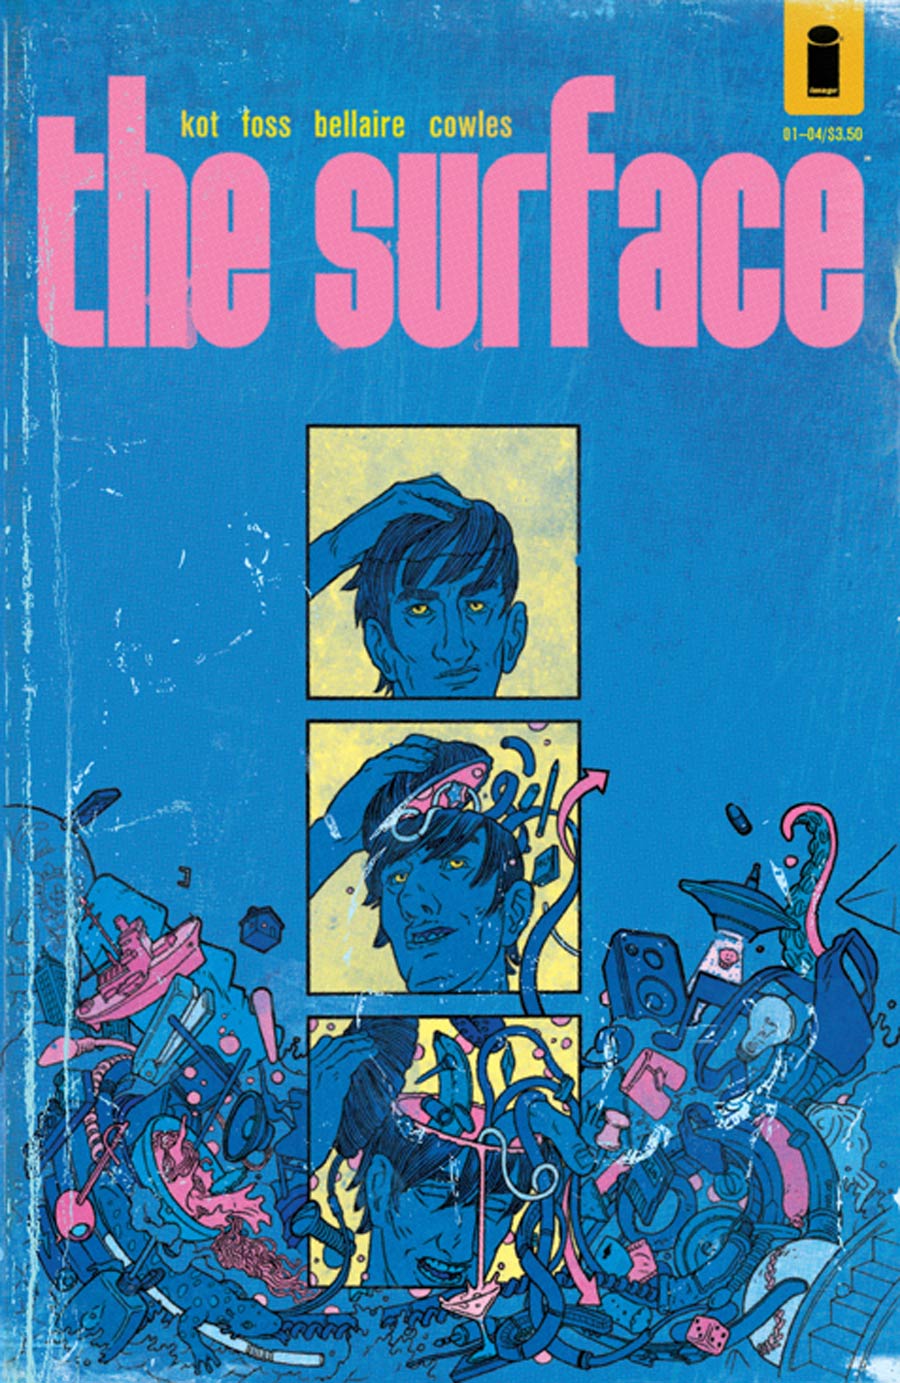 Surface #1 Cover A Langdon Foss & Jordie Bellaire